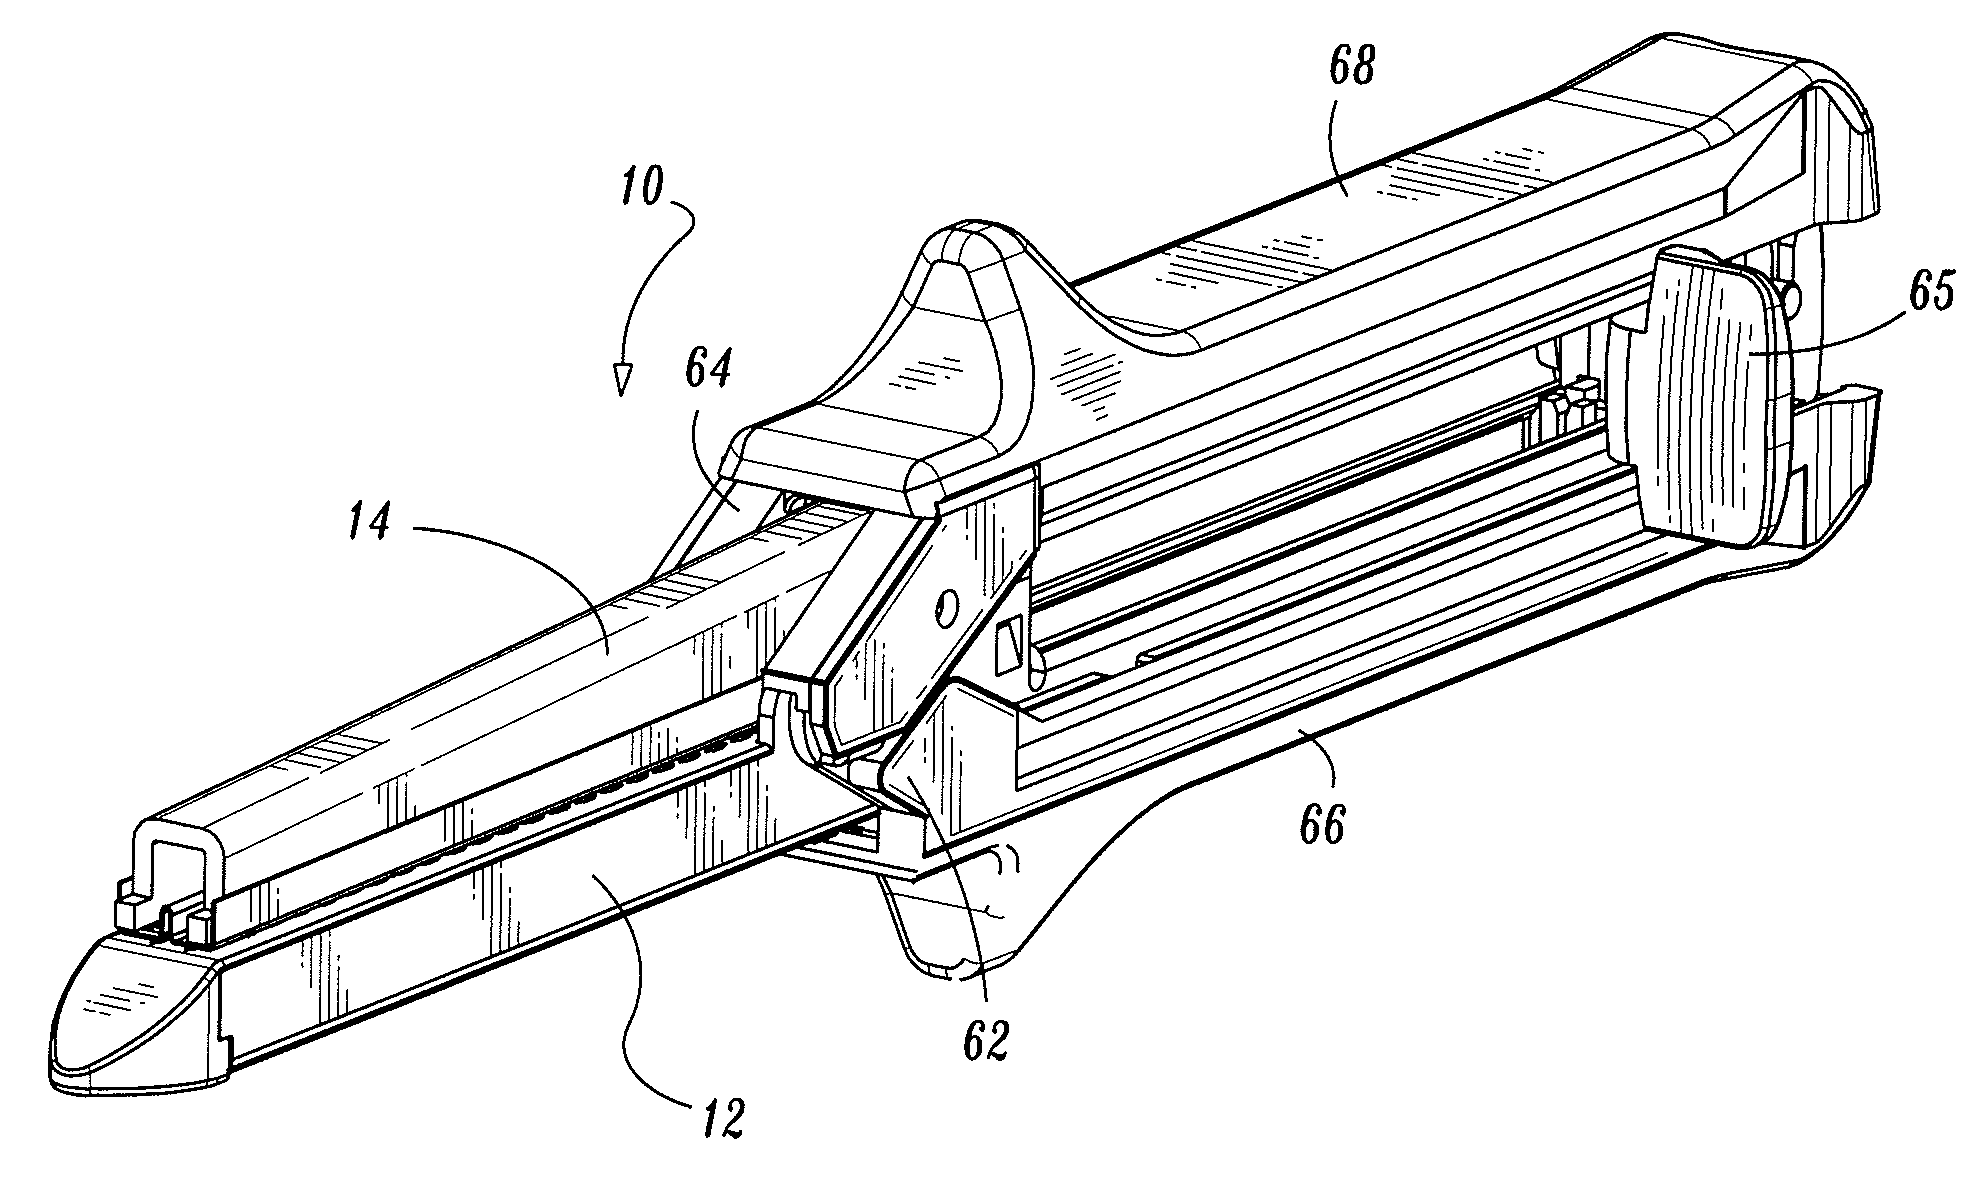 Recognition of interchangeable component of a device